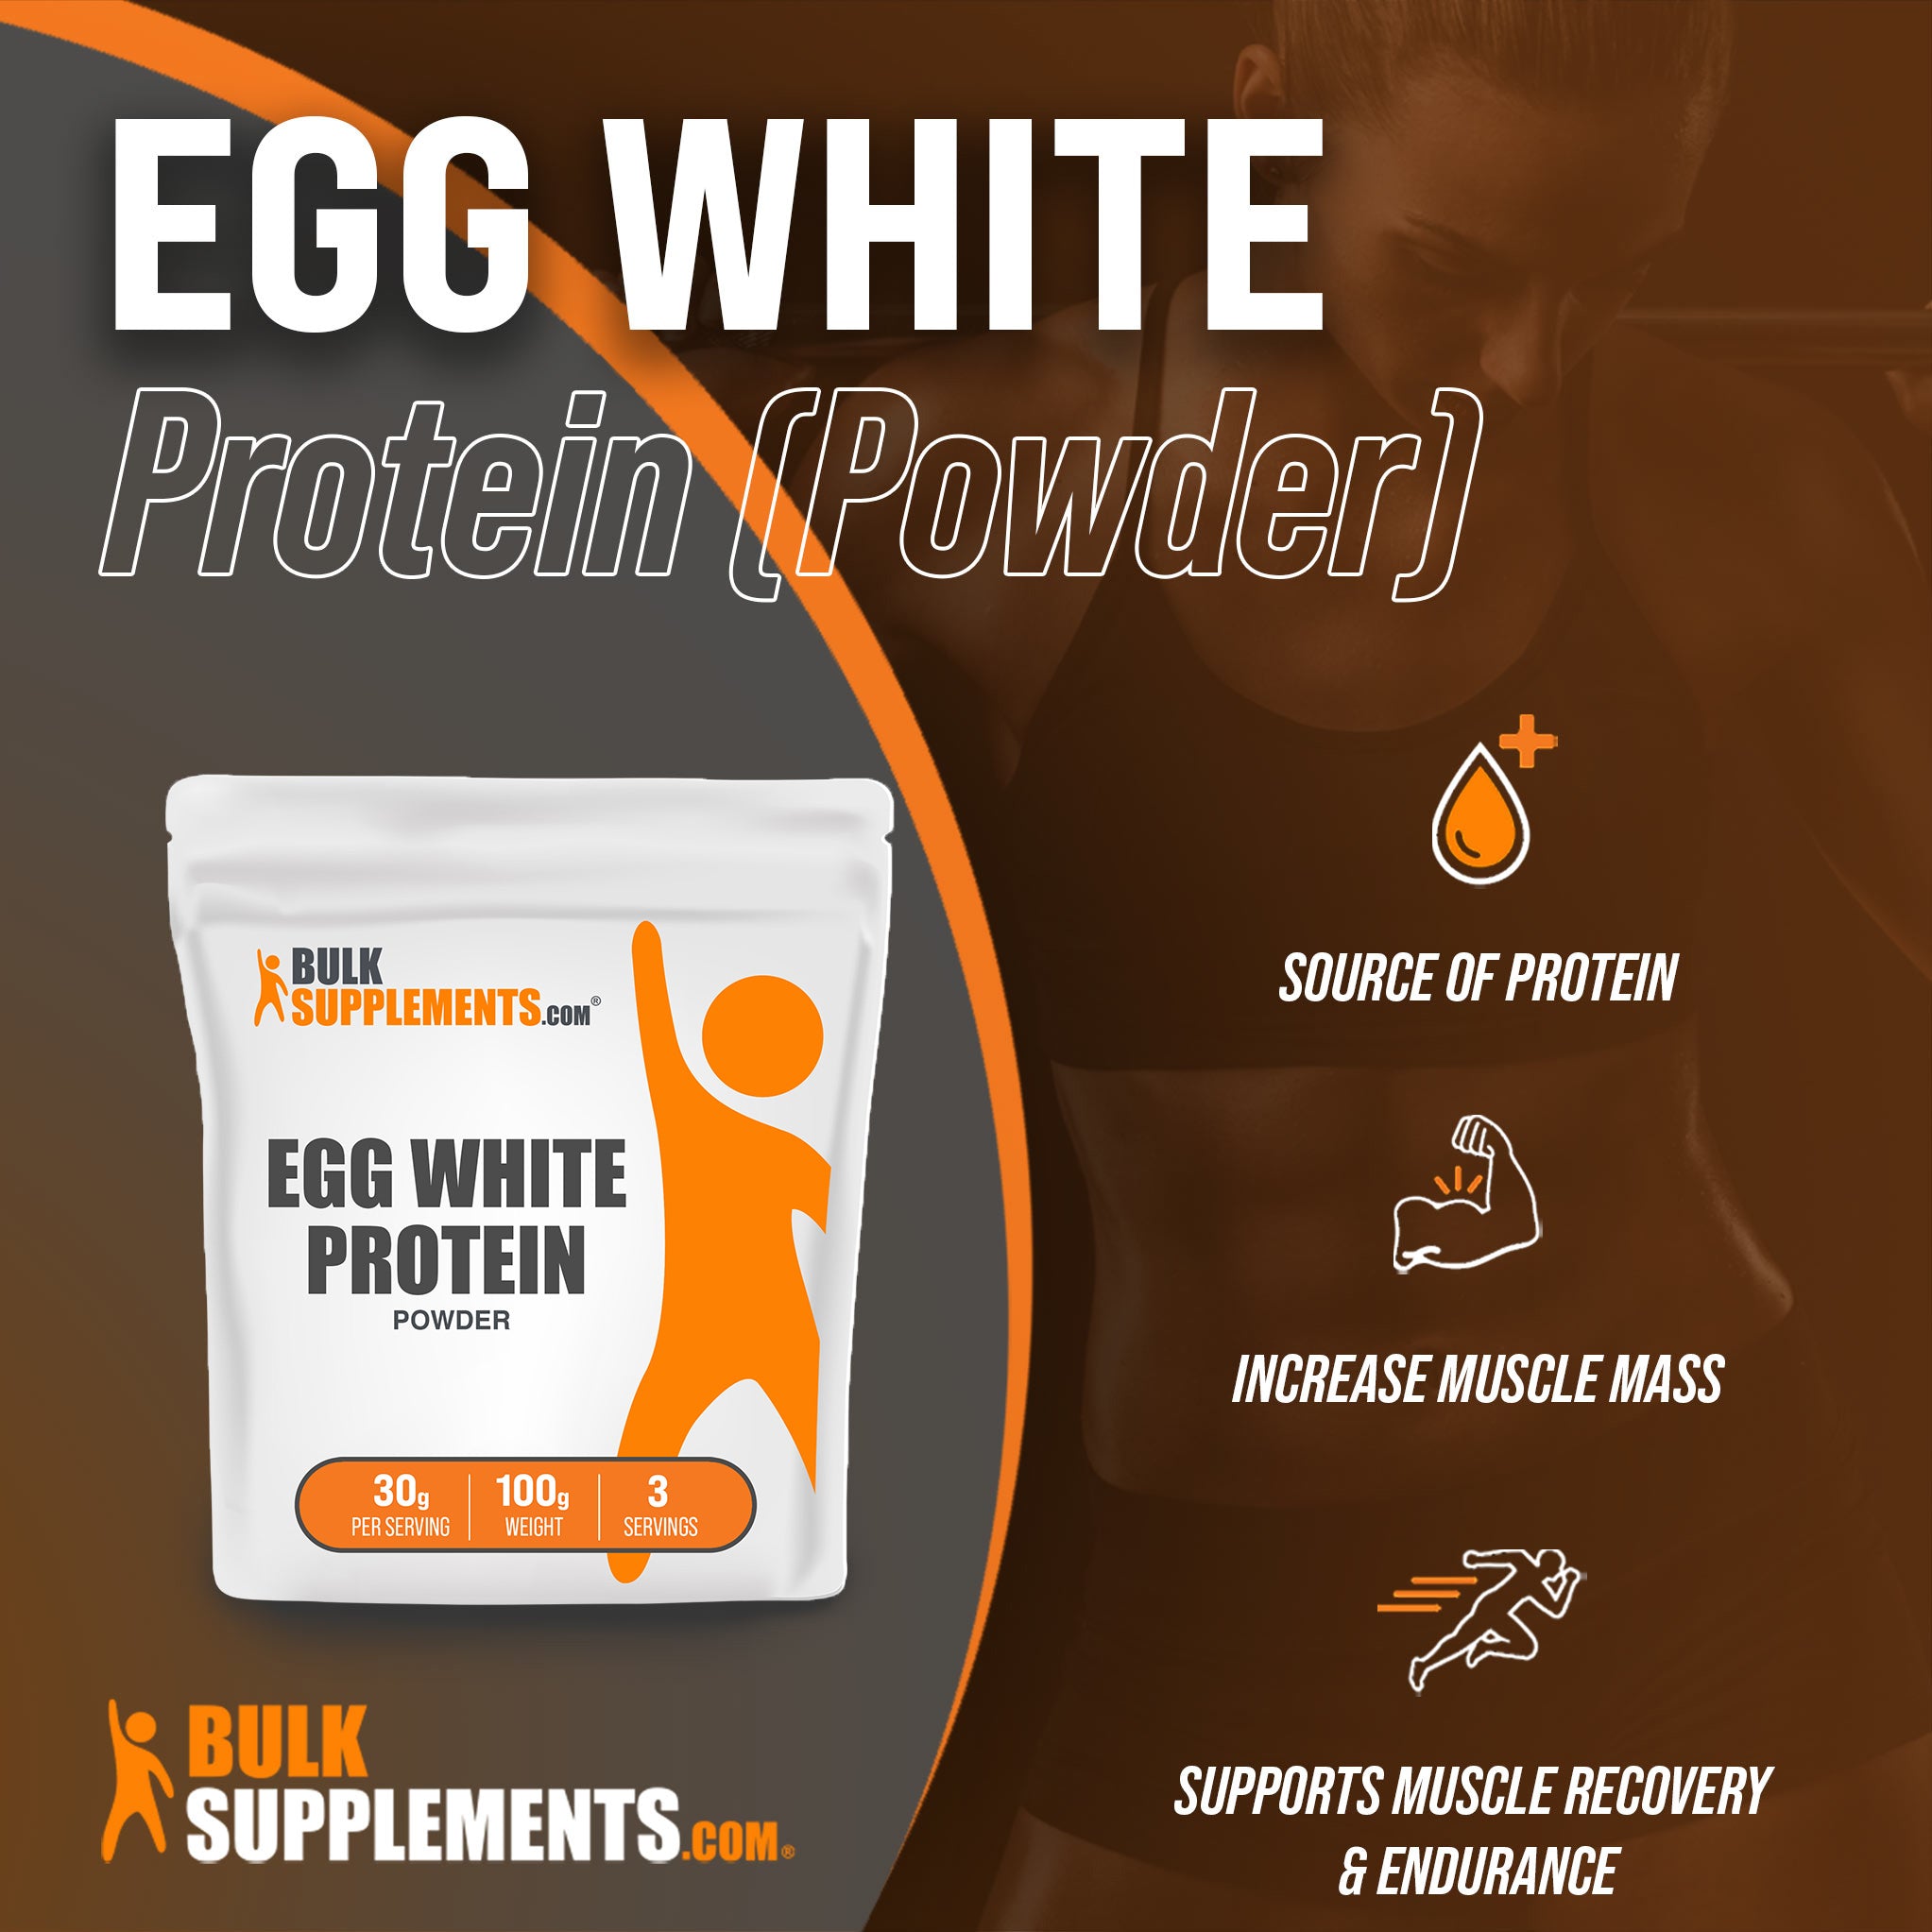 Benefits of Egg White Protein Powder; source of protein, increase muscle mass, supports muscle recovery and endurance